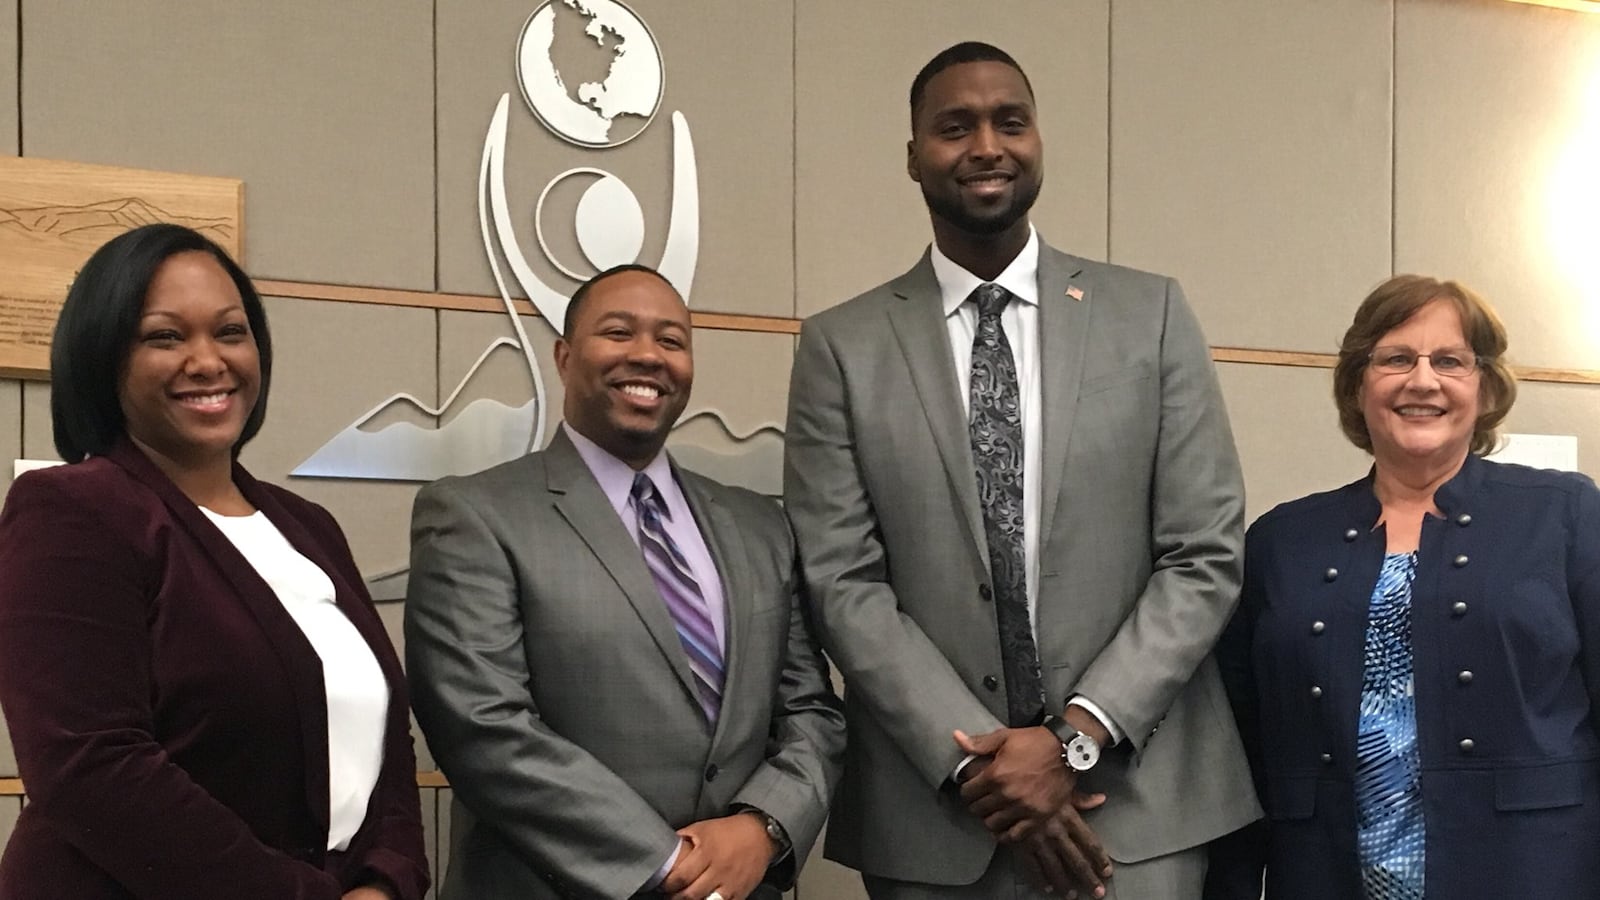 Four new board members, Kyla Armstrong-Romero, Marques Ivey, Kevin Cox and Debbie Gerkin after they were sworn in. (Photo courtesy of Aurora Public Schools)